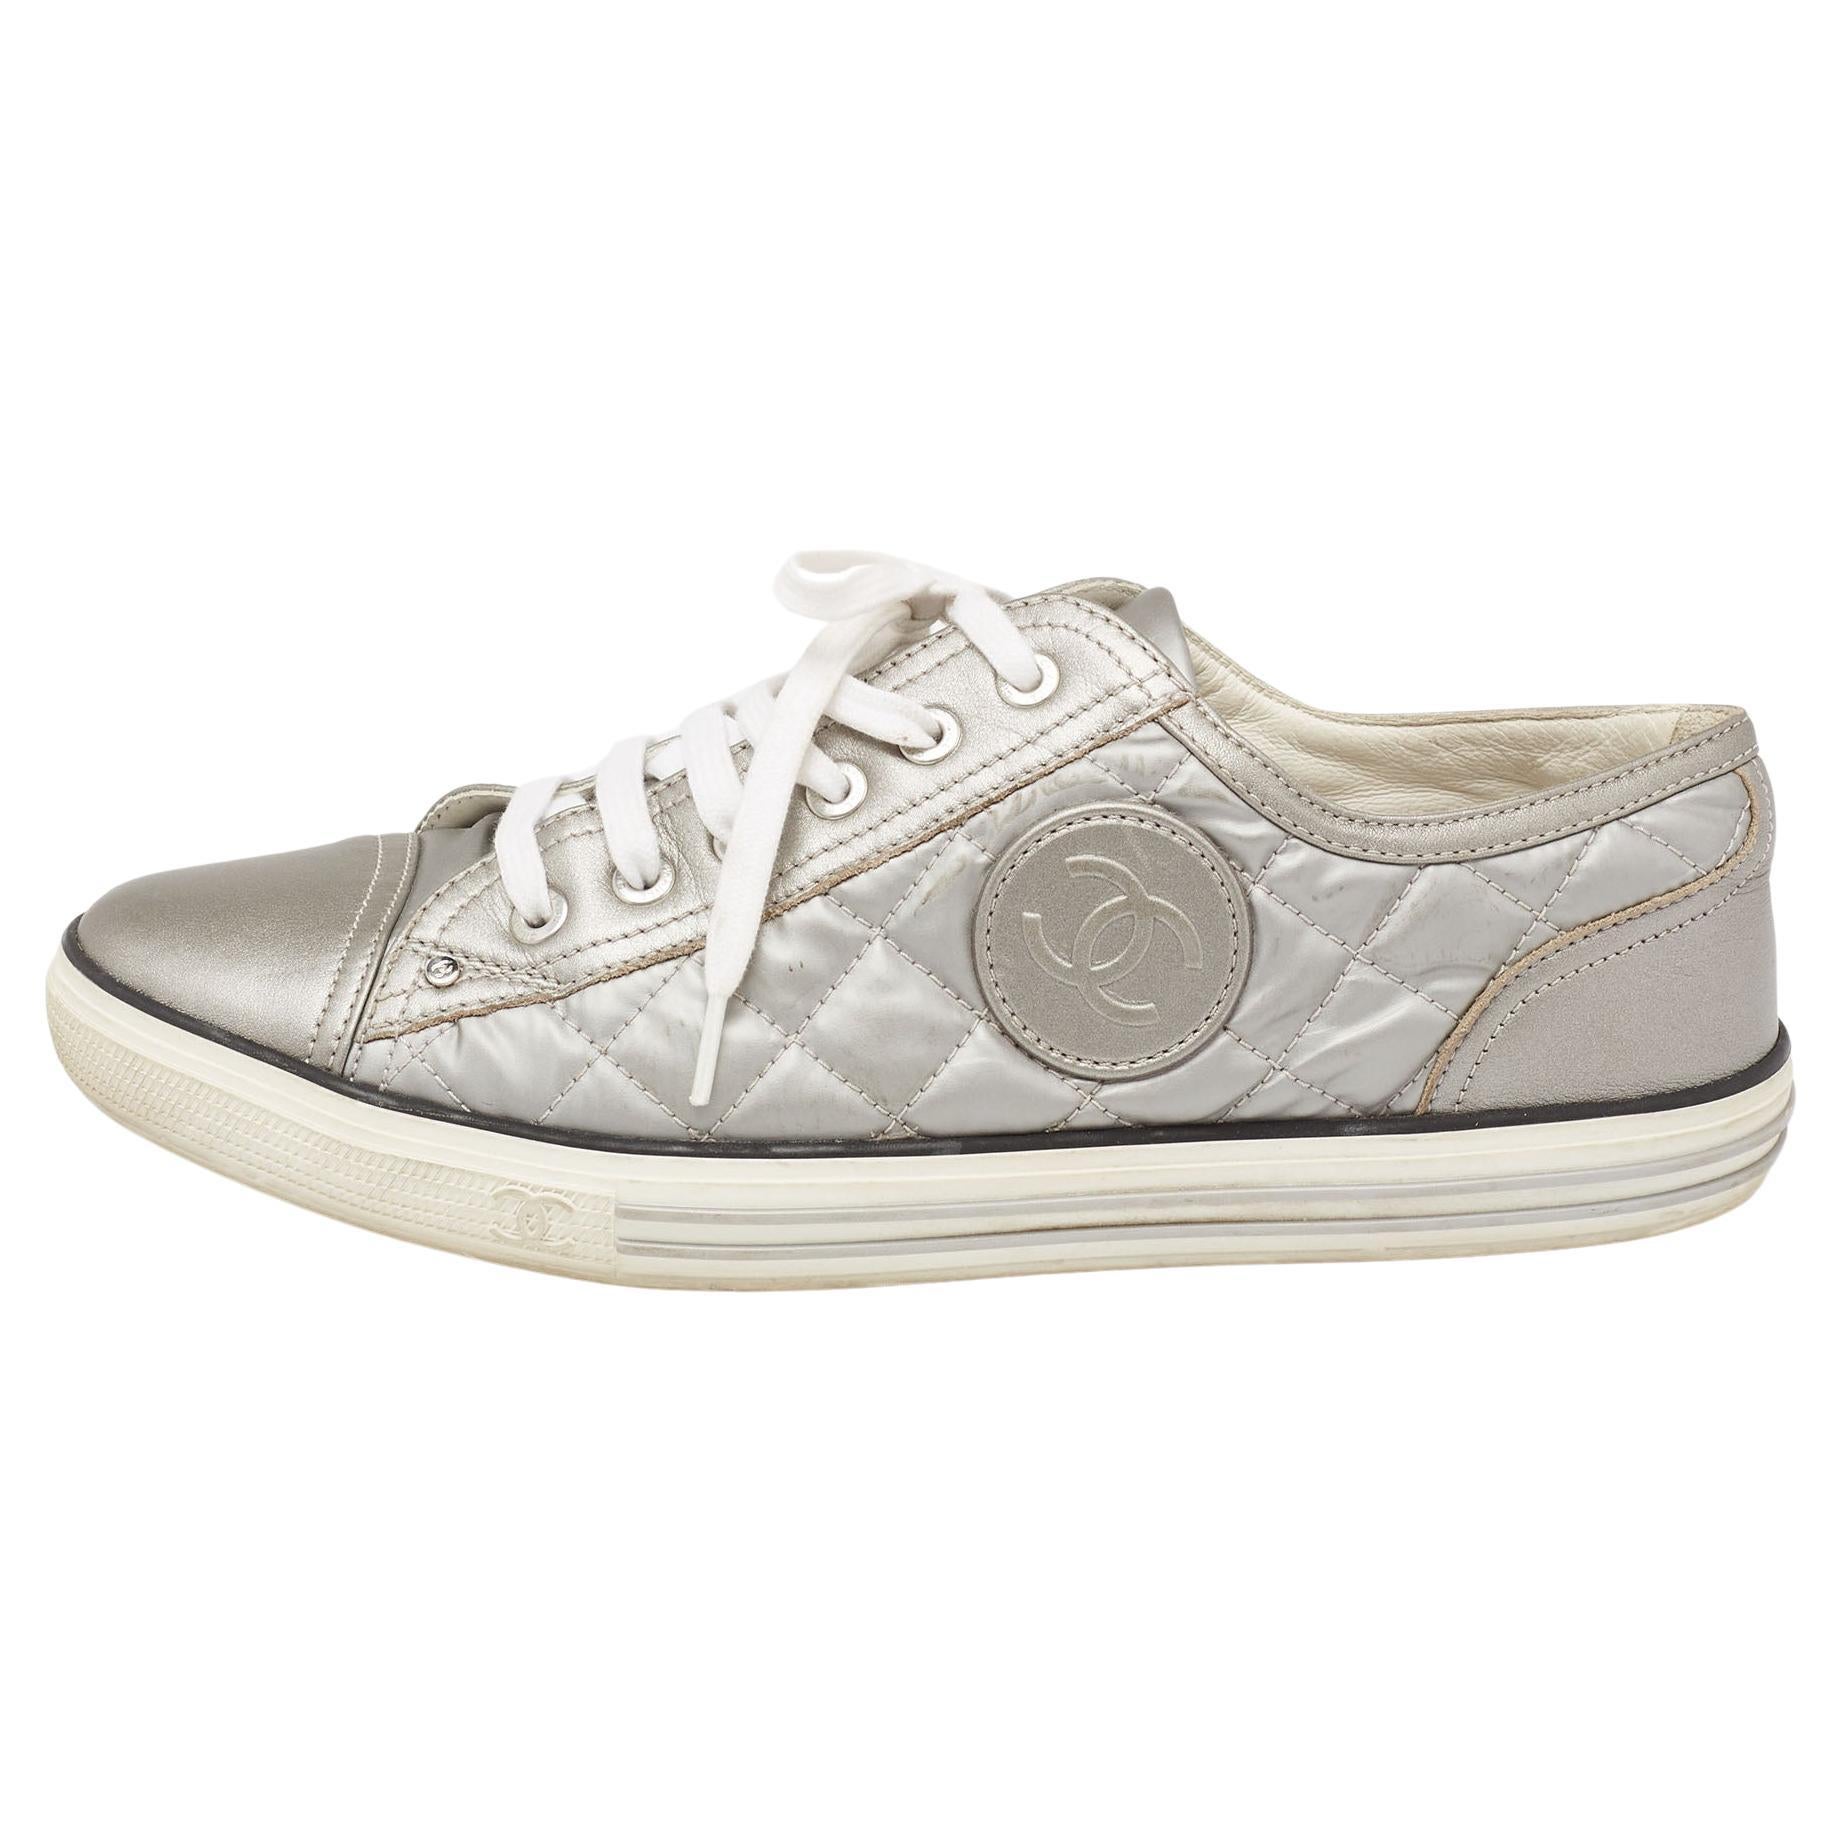 Chanel Metallic Silver Leather And Nylon CC Low Top Sneaker Size